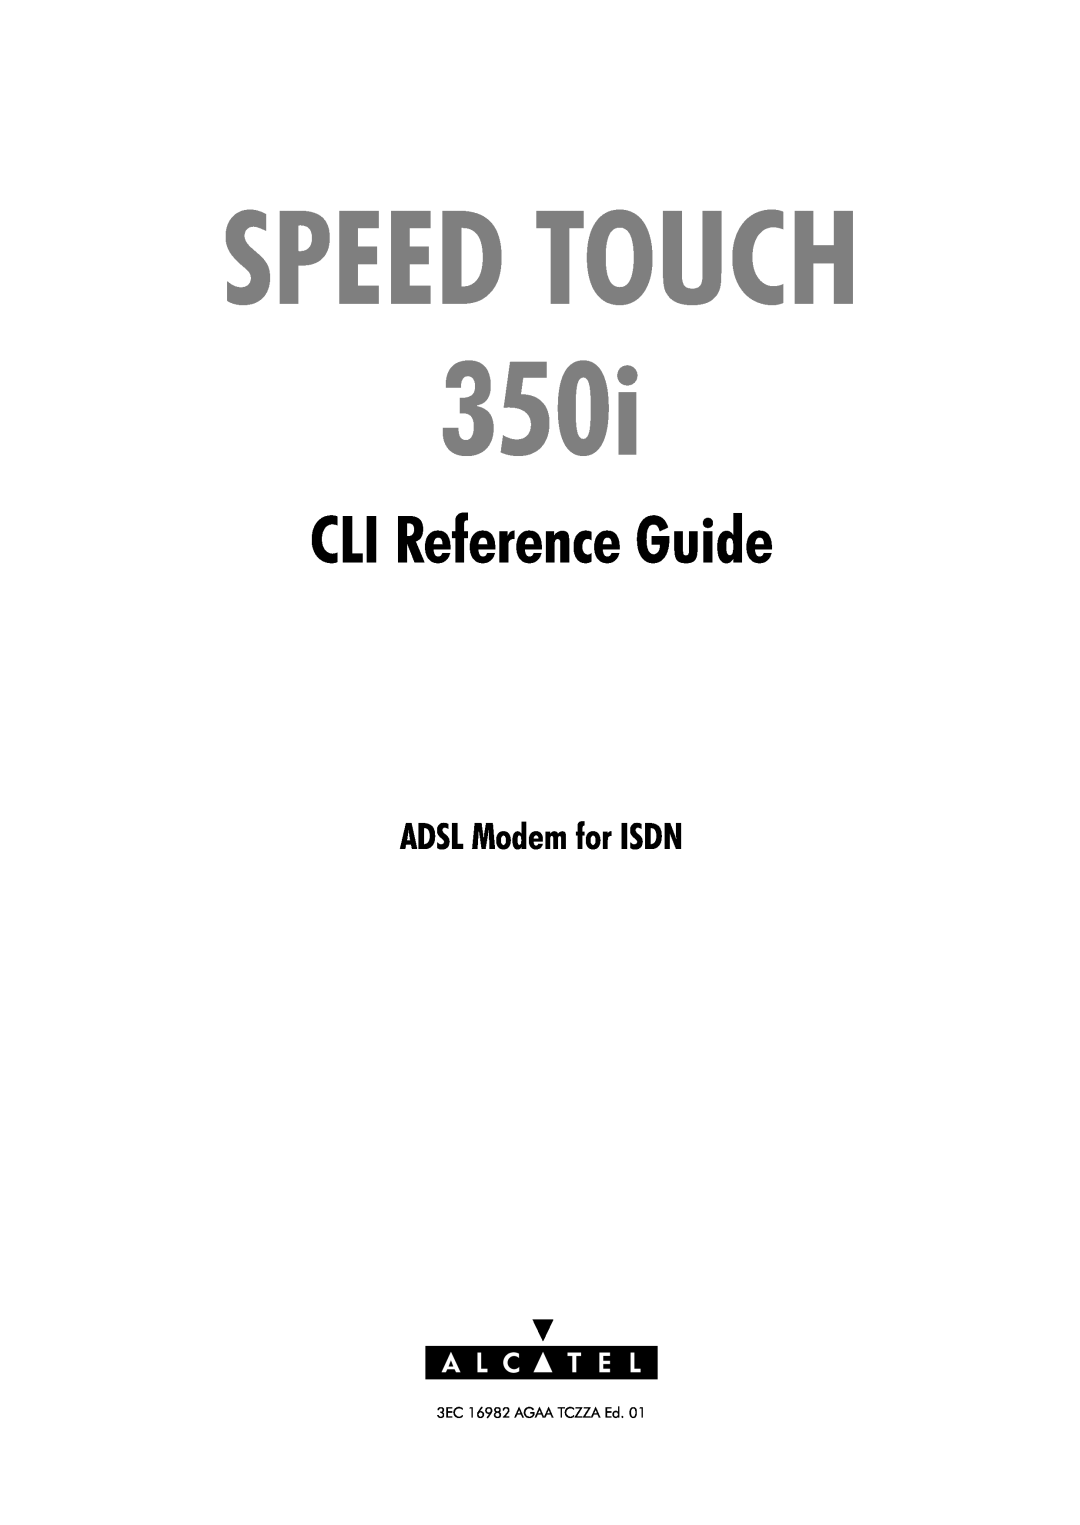 Alcatel Carrier Internetworking Solutions 350I manual ADSL Modem for ISDN, 350i, Speed Touch, CLI Reference Guide 